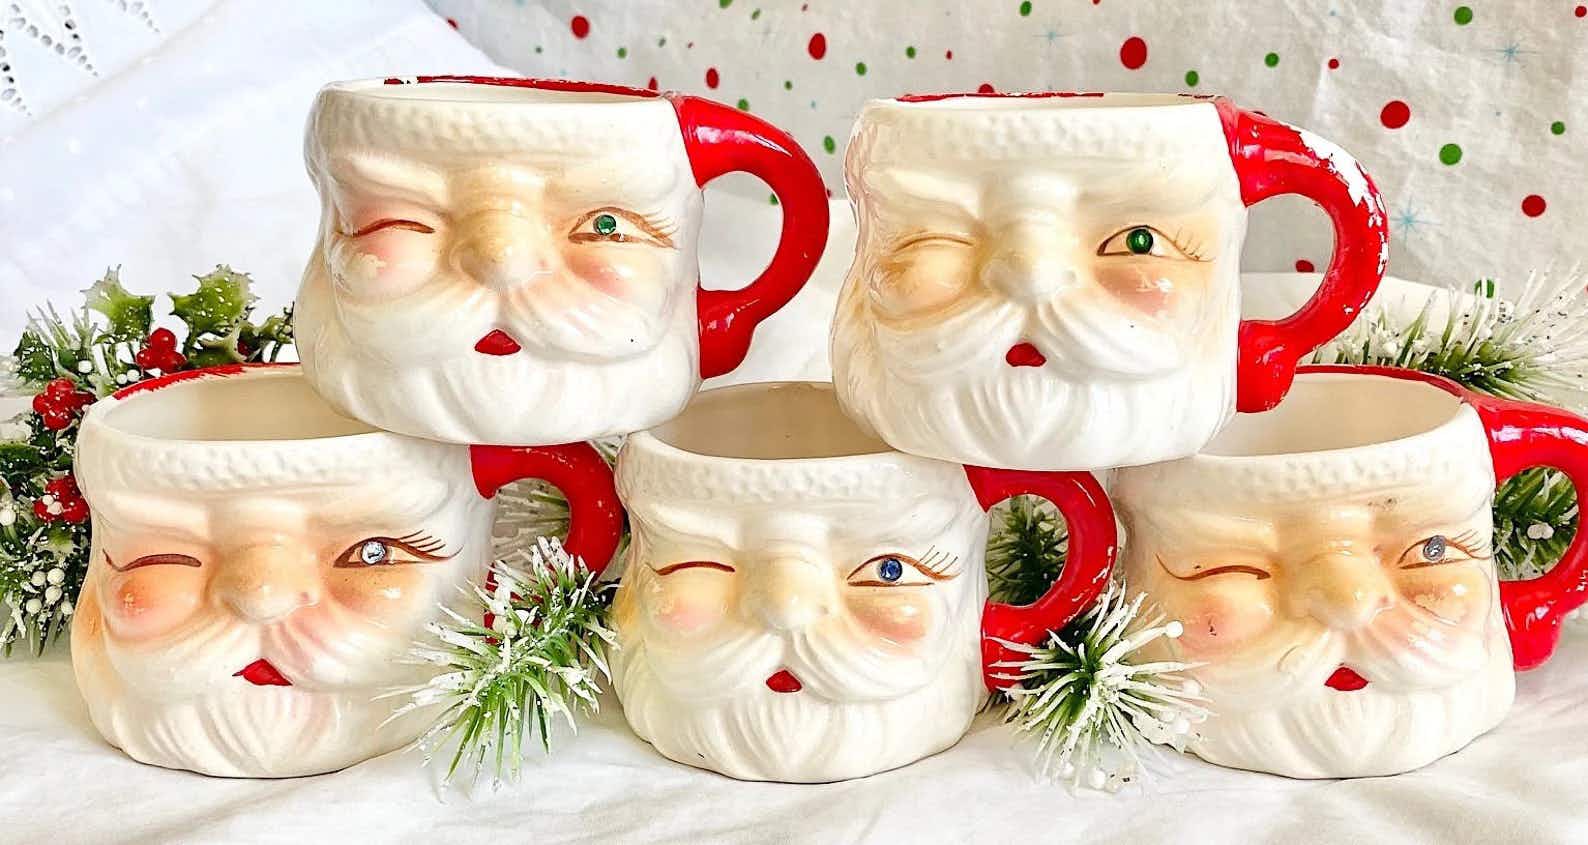 vintage santa mugs - A collection of Hand-Painted Winking Santa Face Mugs on a table decorated with holiday decorations